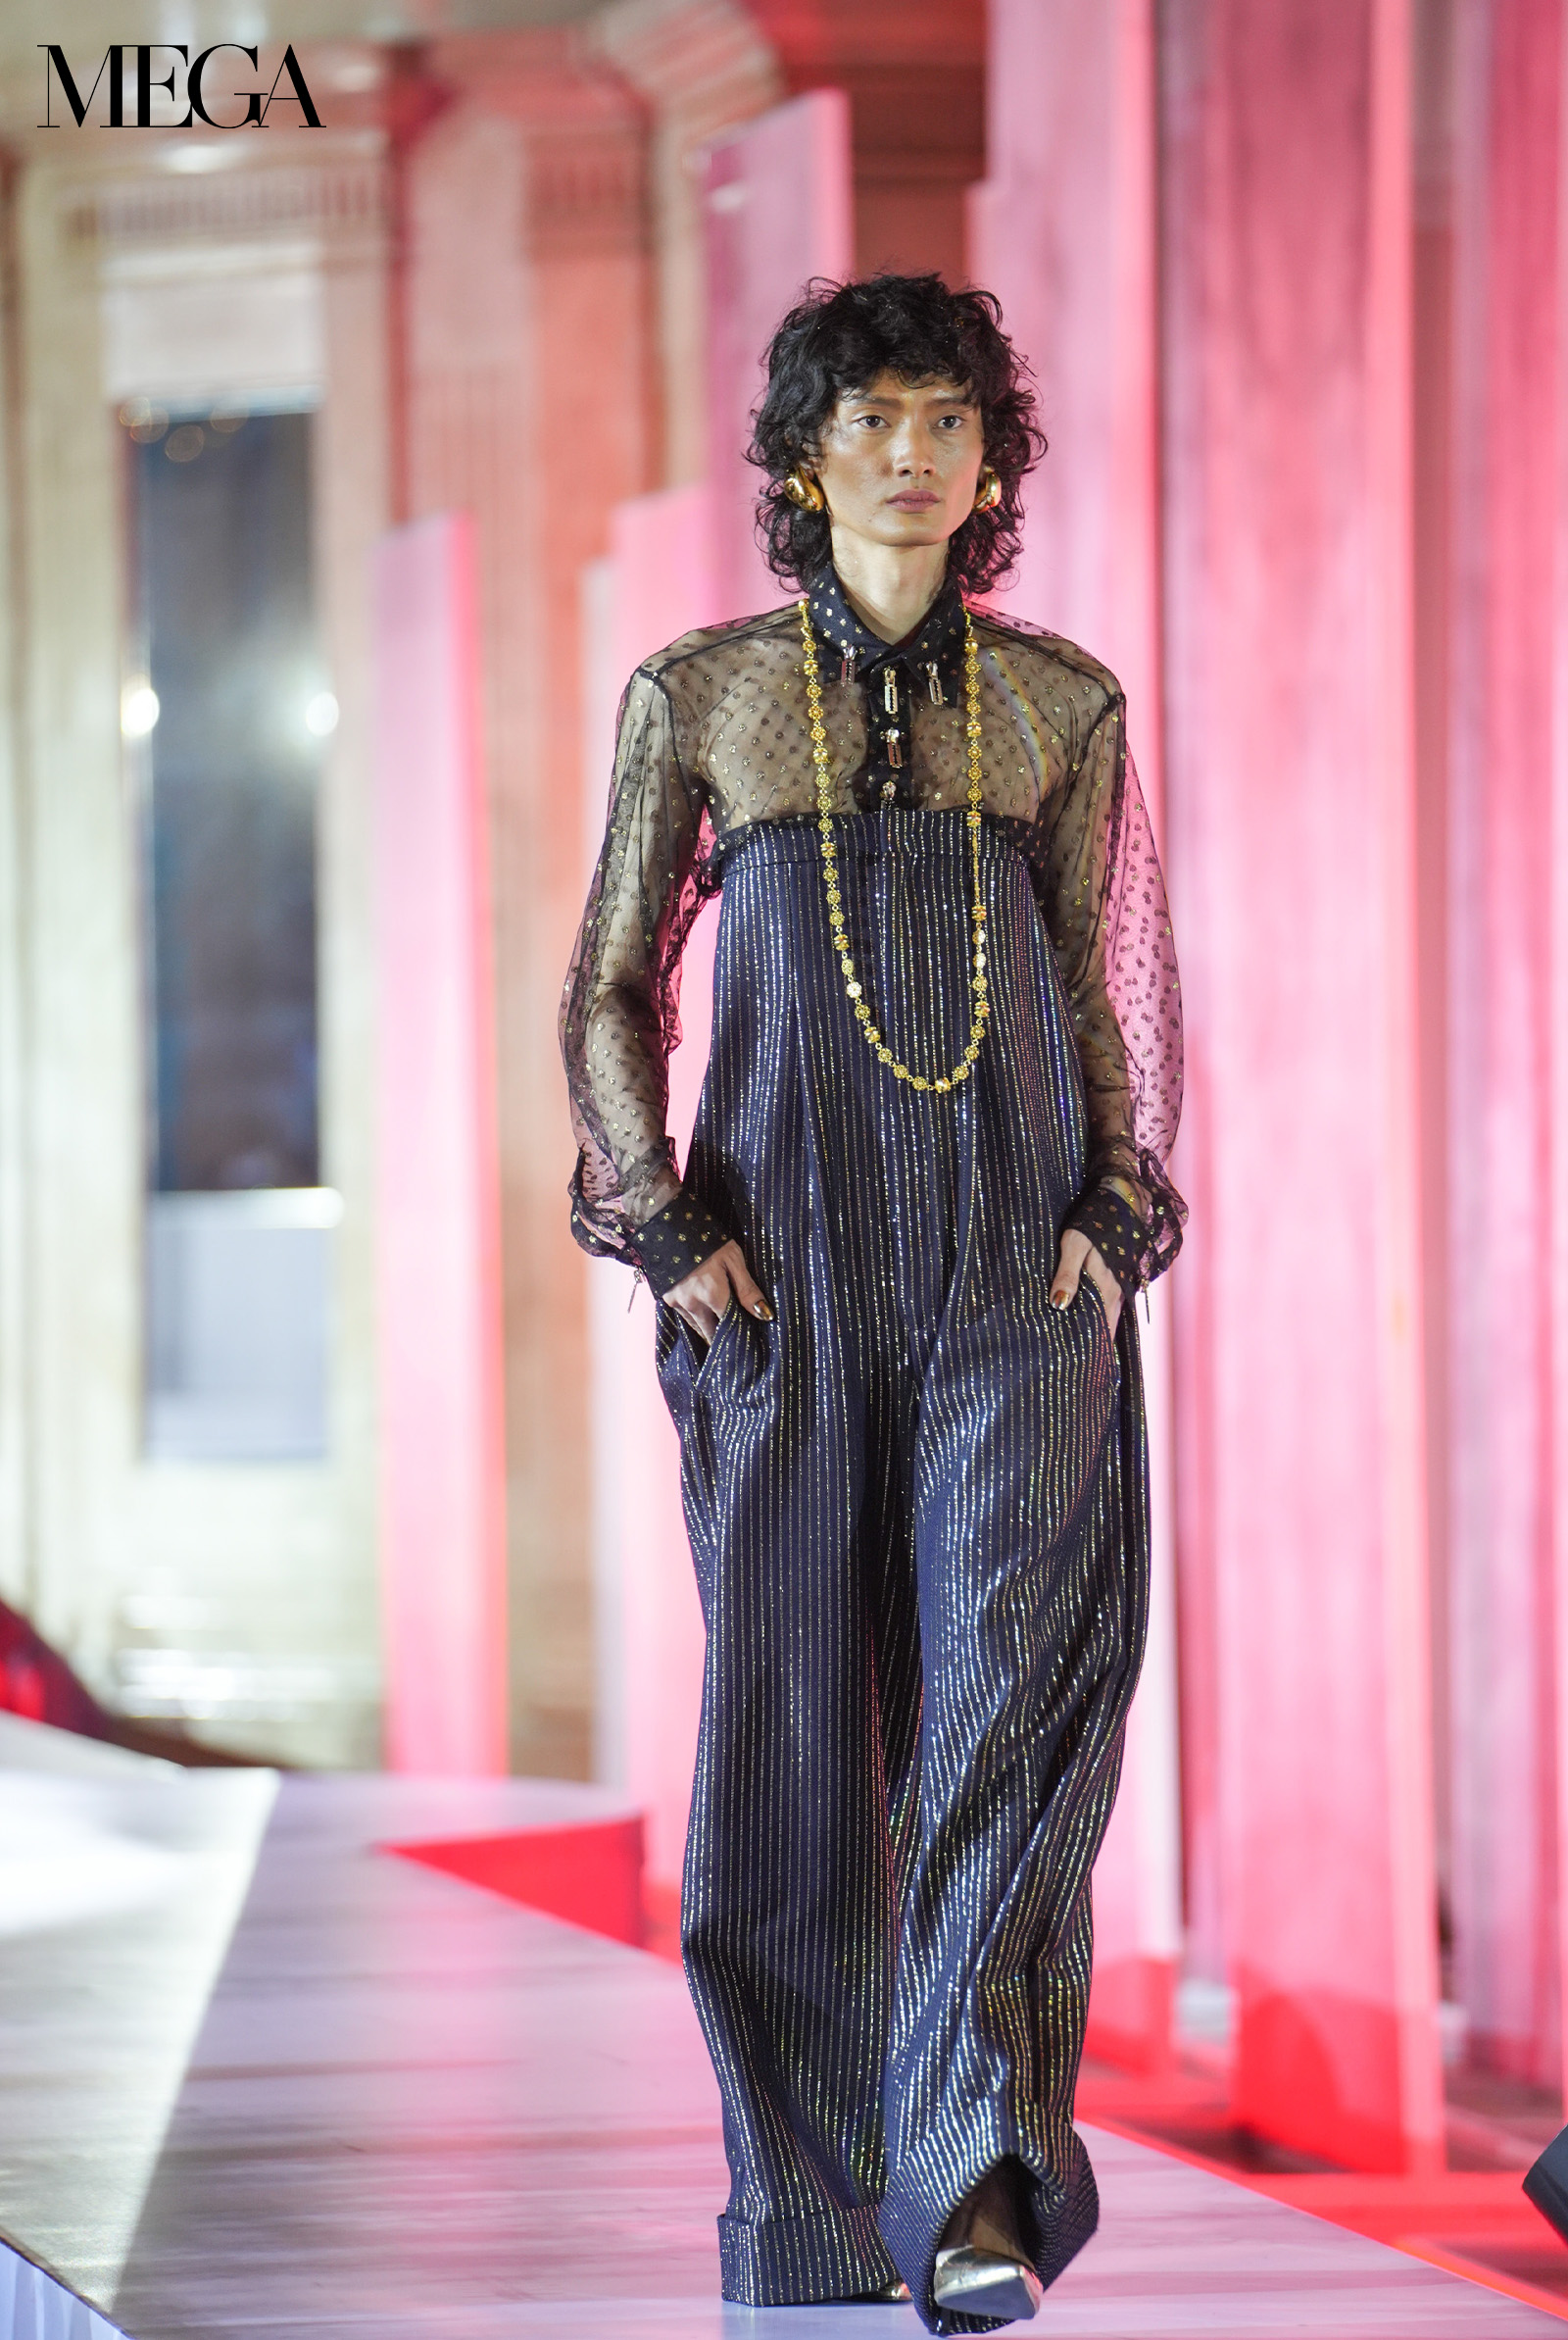 Ivar Aseron's Collection for the Red Charity Gala